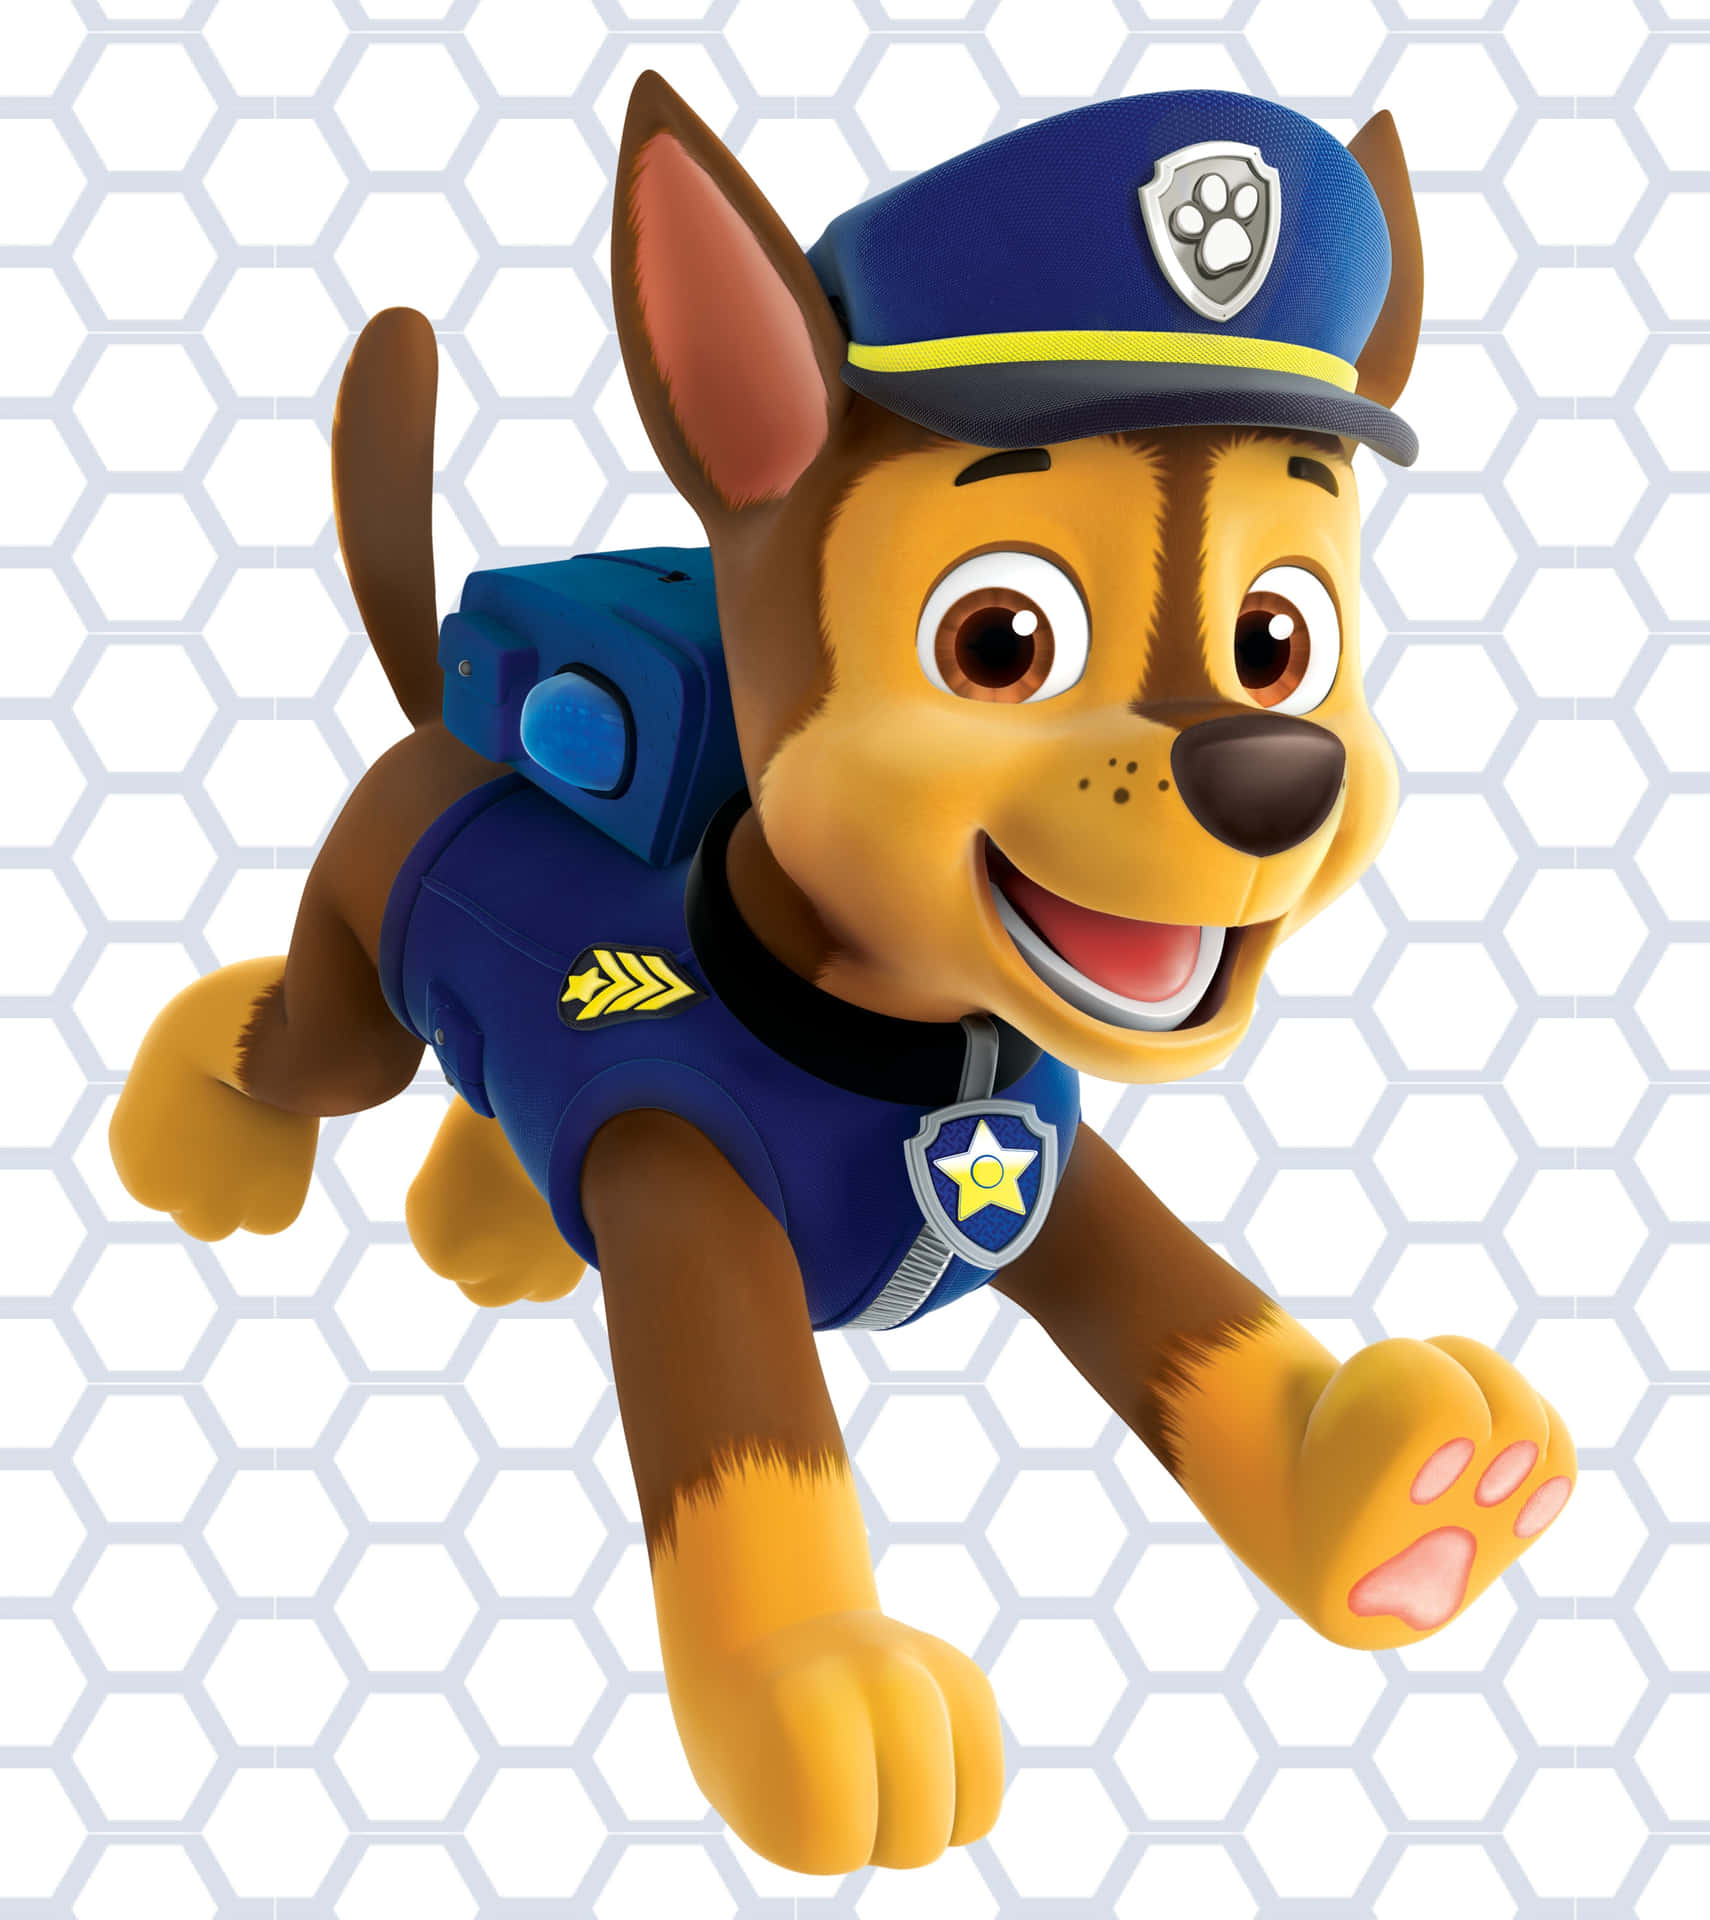 Get Ready for an Adventure with the Paw Patrol!